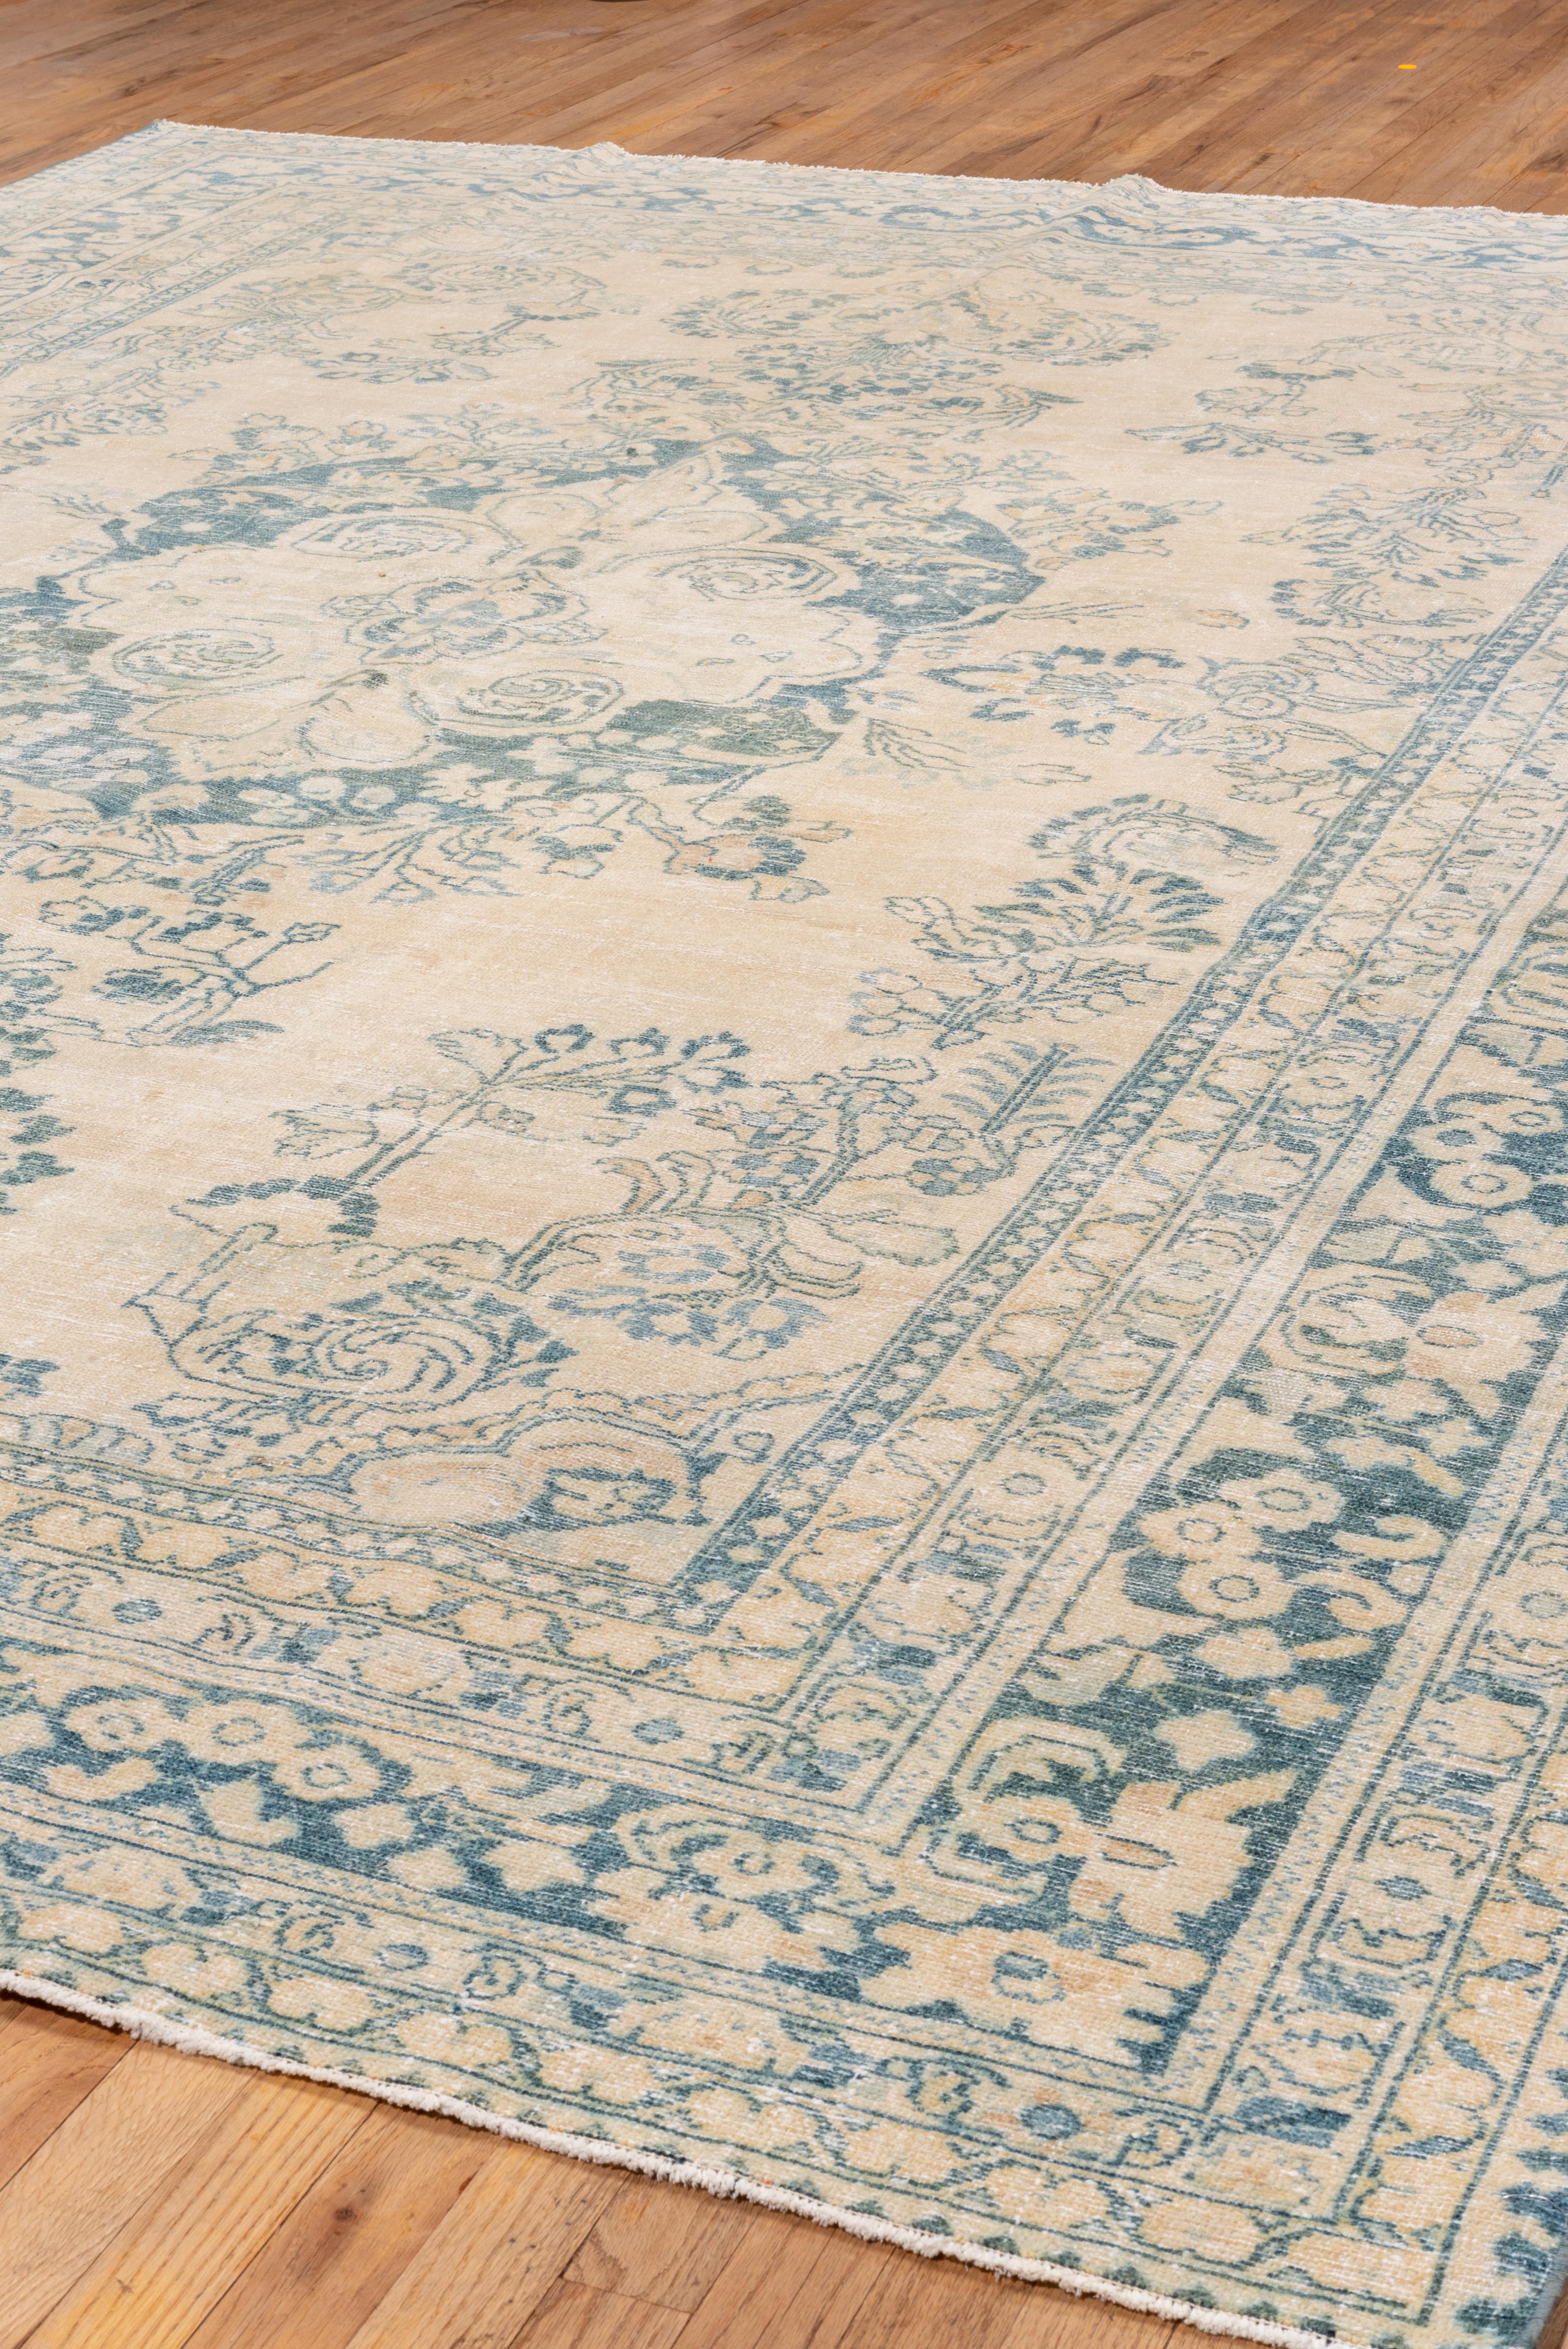 Hand-Knotted Antique Ivory and Blue Persian Lilian Rug, circa 1930s